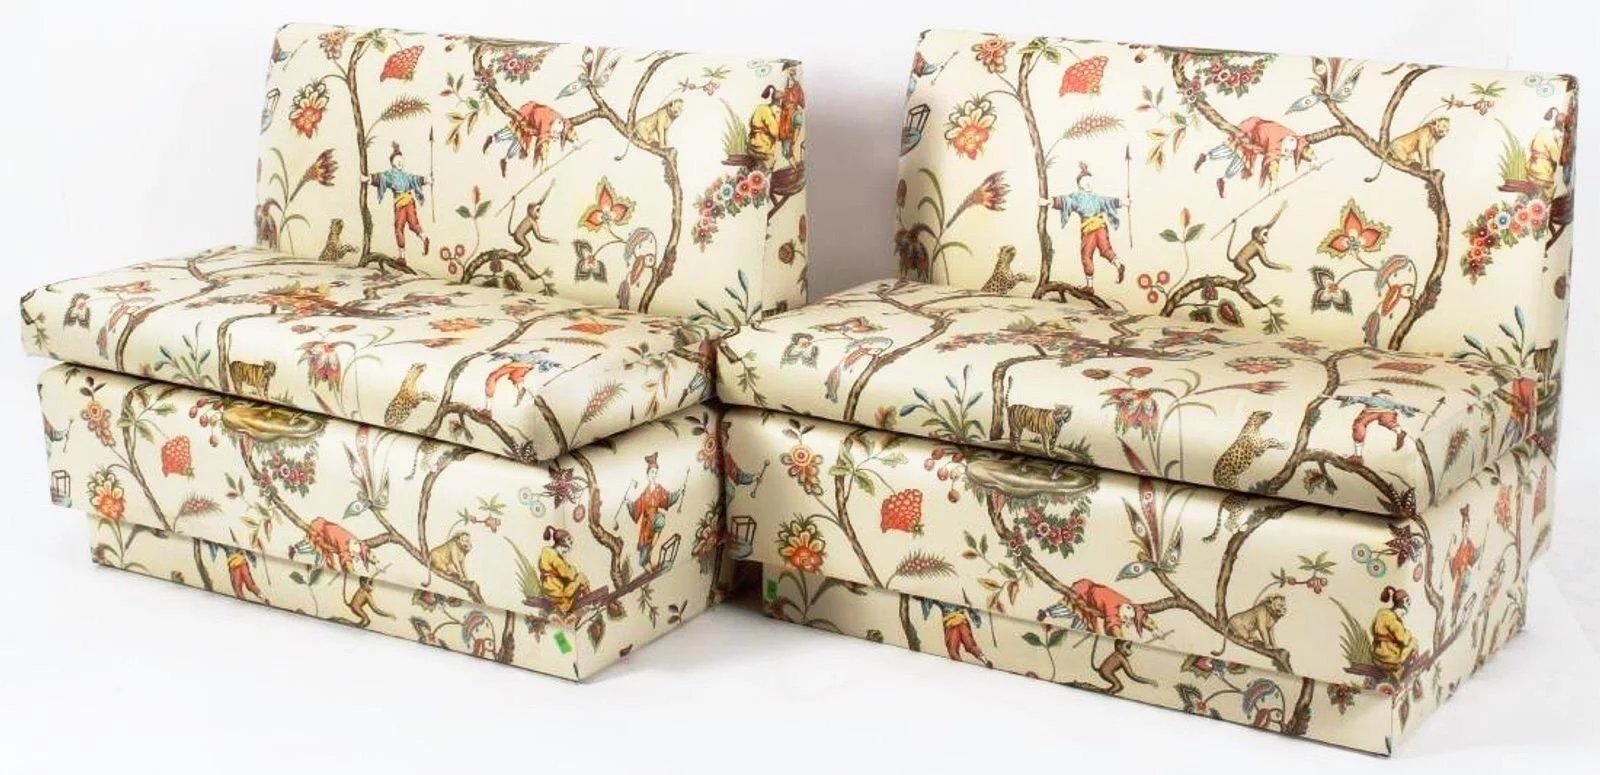 Scalamandre vintage chinoiserie glazed cotton chintz banquette
Gorgeous custom ordered chinoiserie canquette. Cream background features a gently ordered pattern featuring acrobats, tigers, monkeys, elephants and stylized foliage, blossoms and